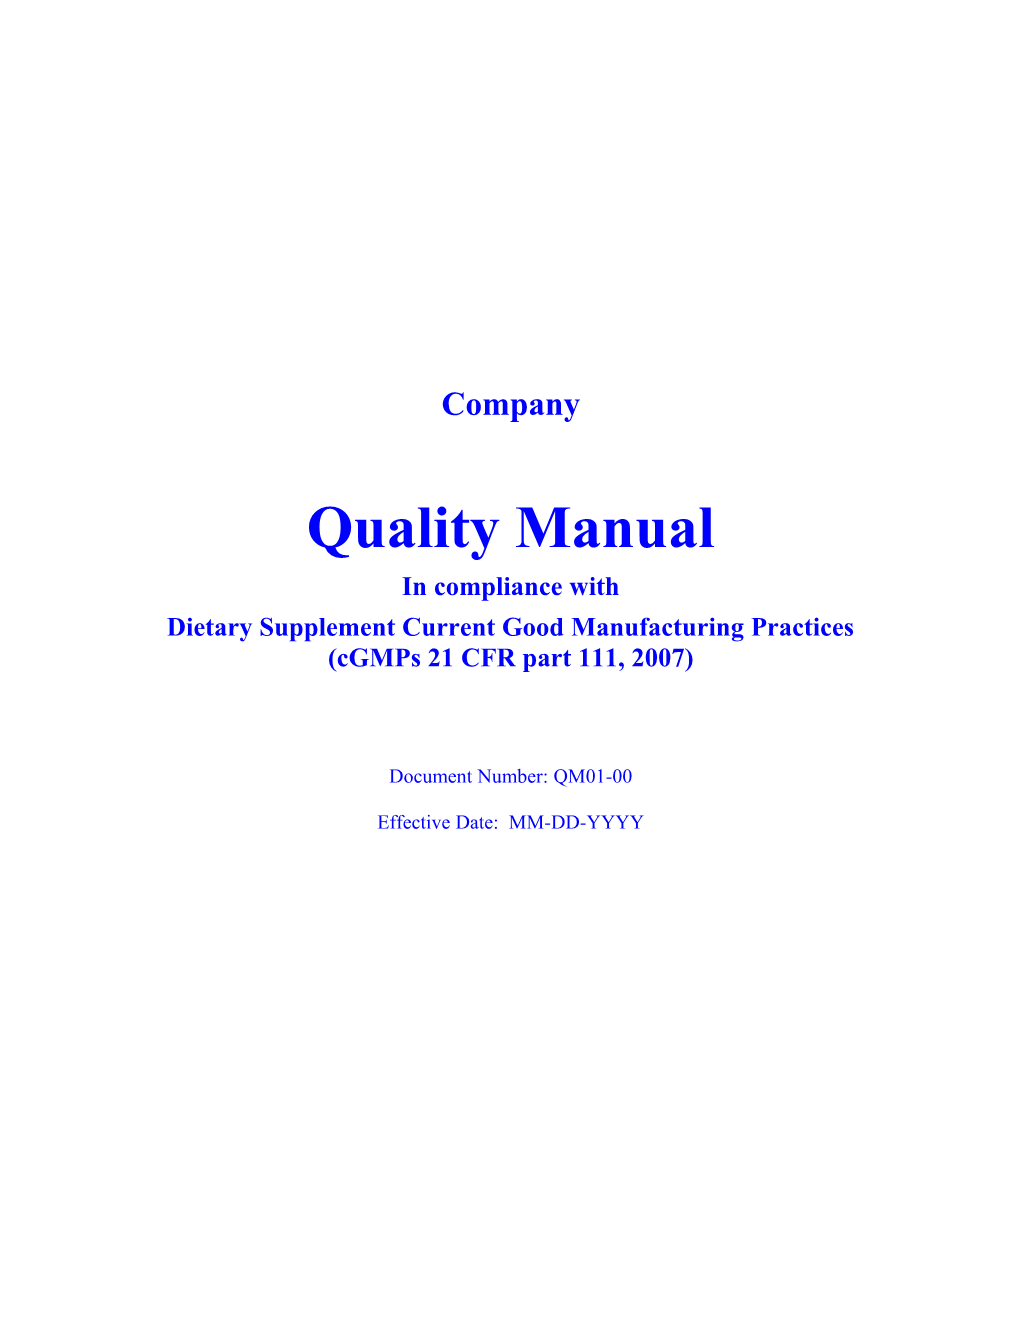 Quality Manual DS GMP 2007 Contents